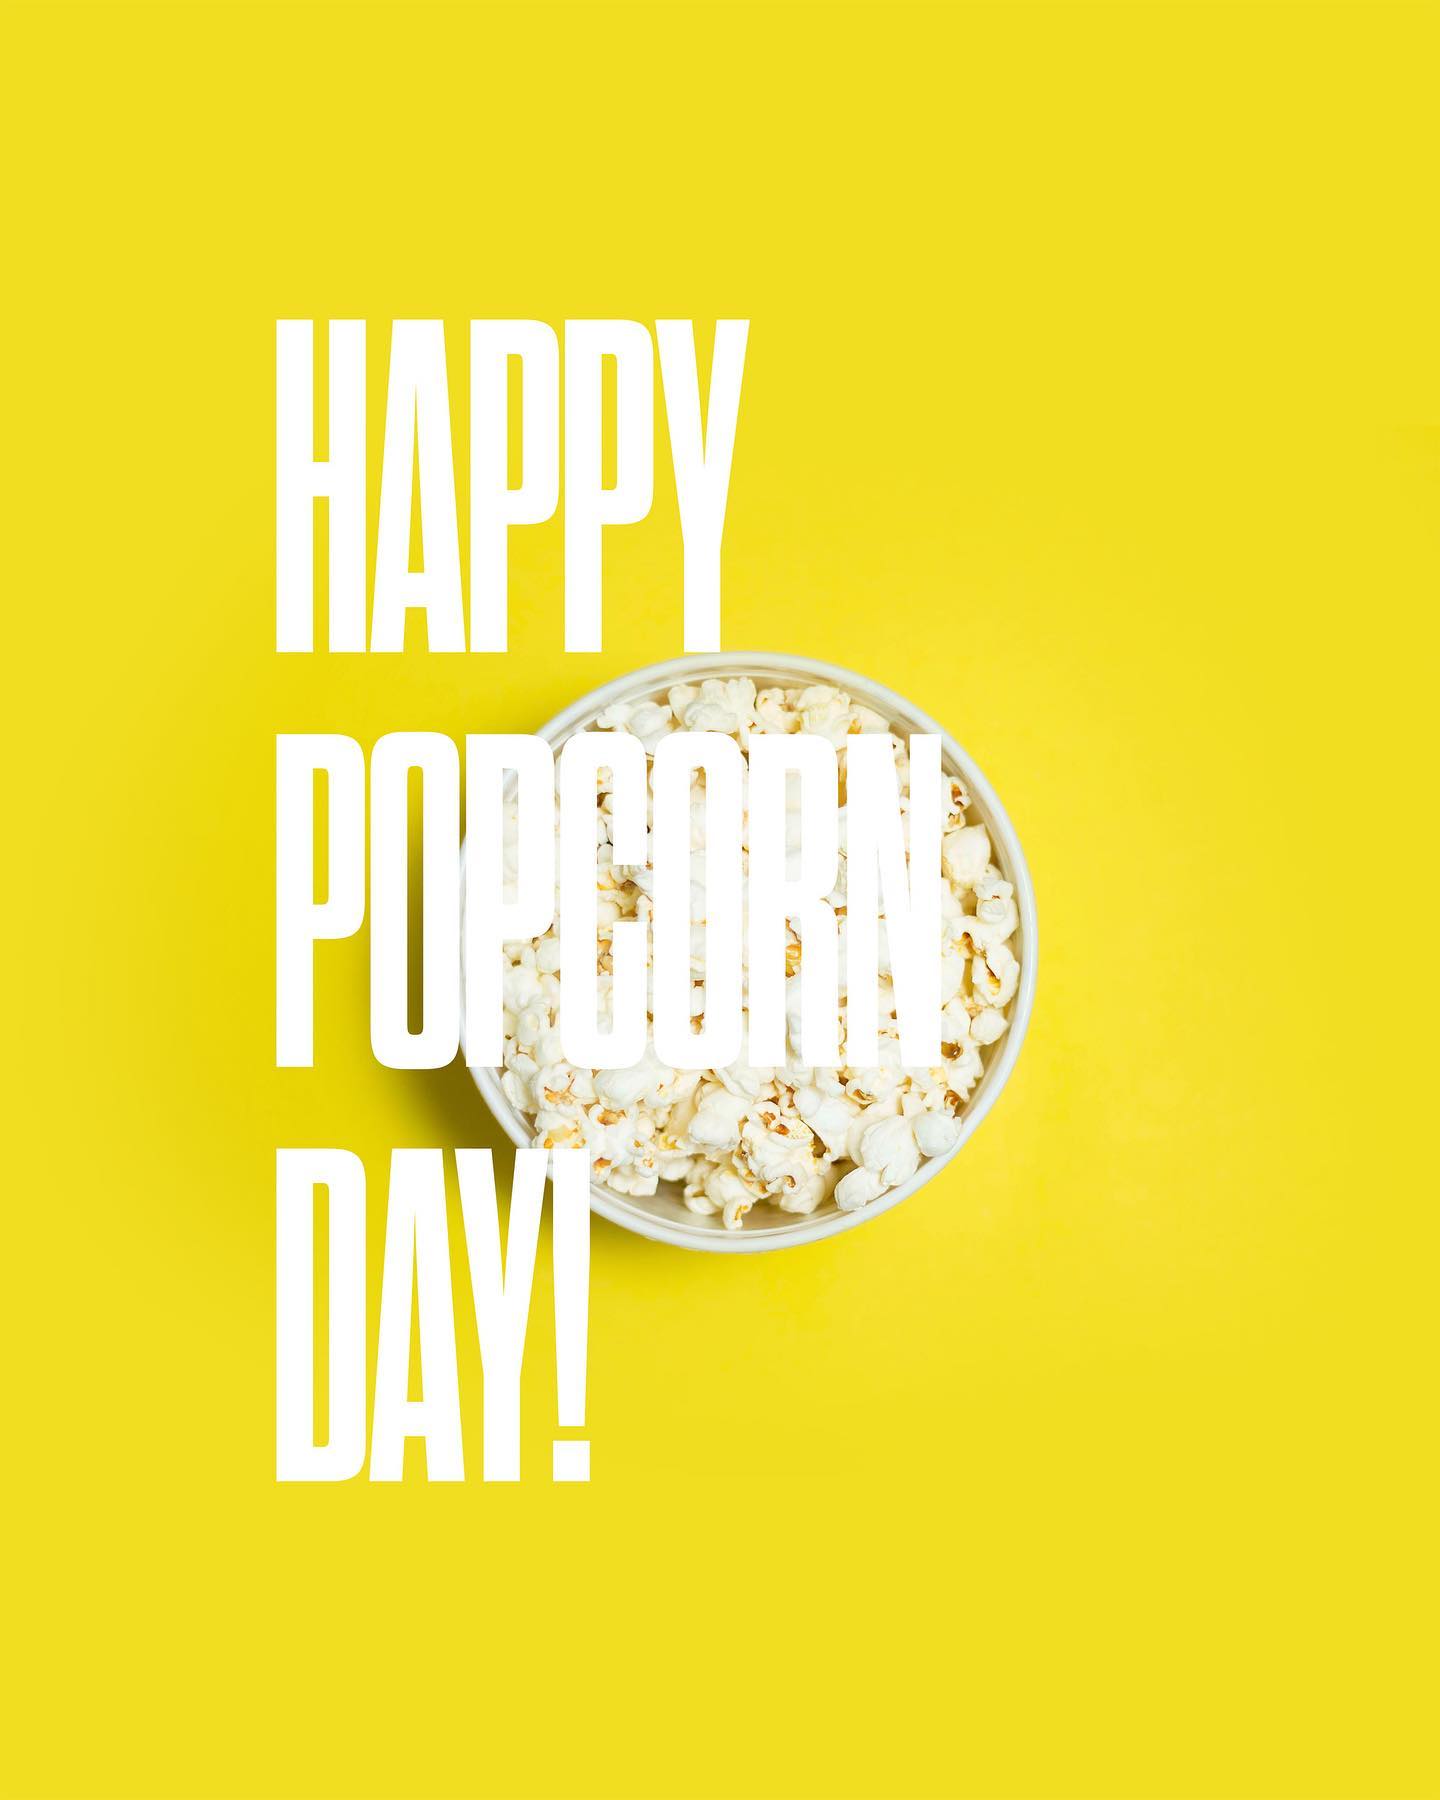 Buttered? Caramel? Cheddar? Kettle Corn? Chocolate-covered? Plain? What’s your favorite?